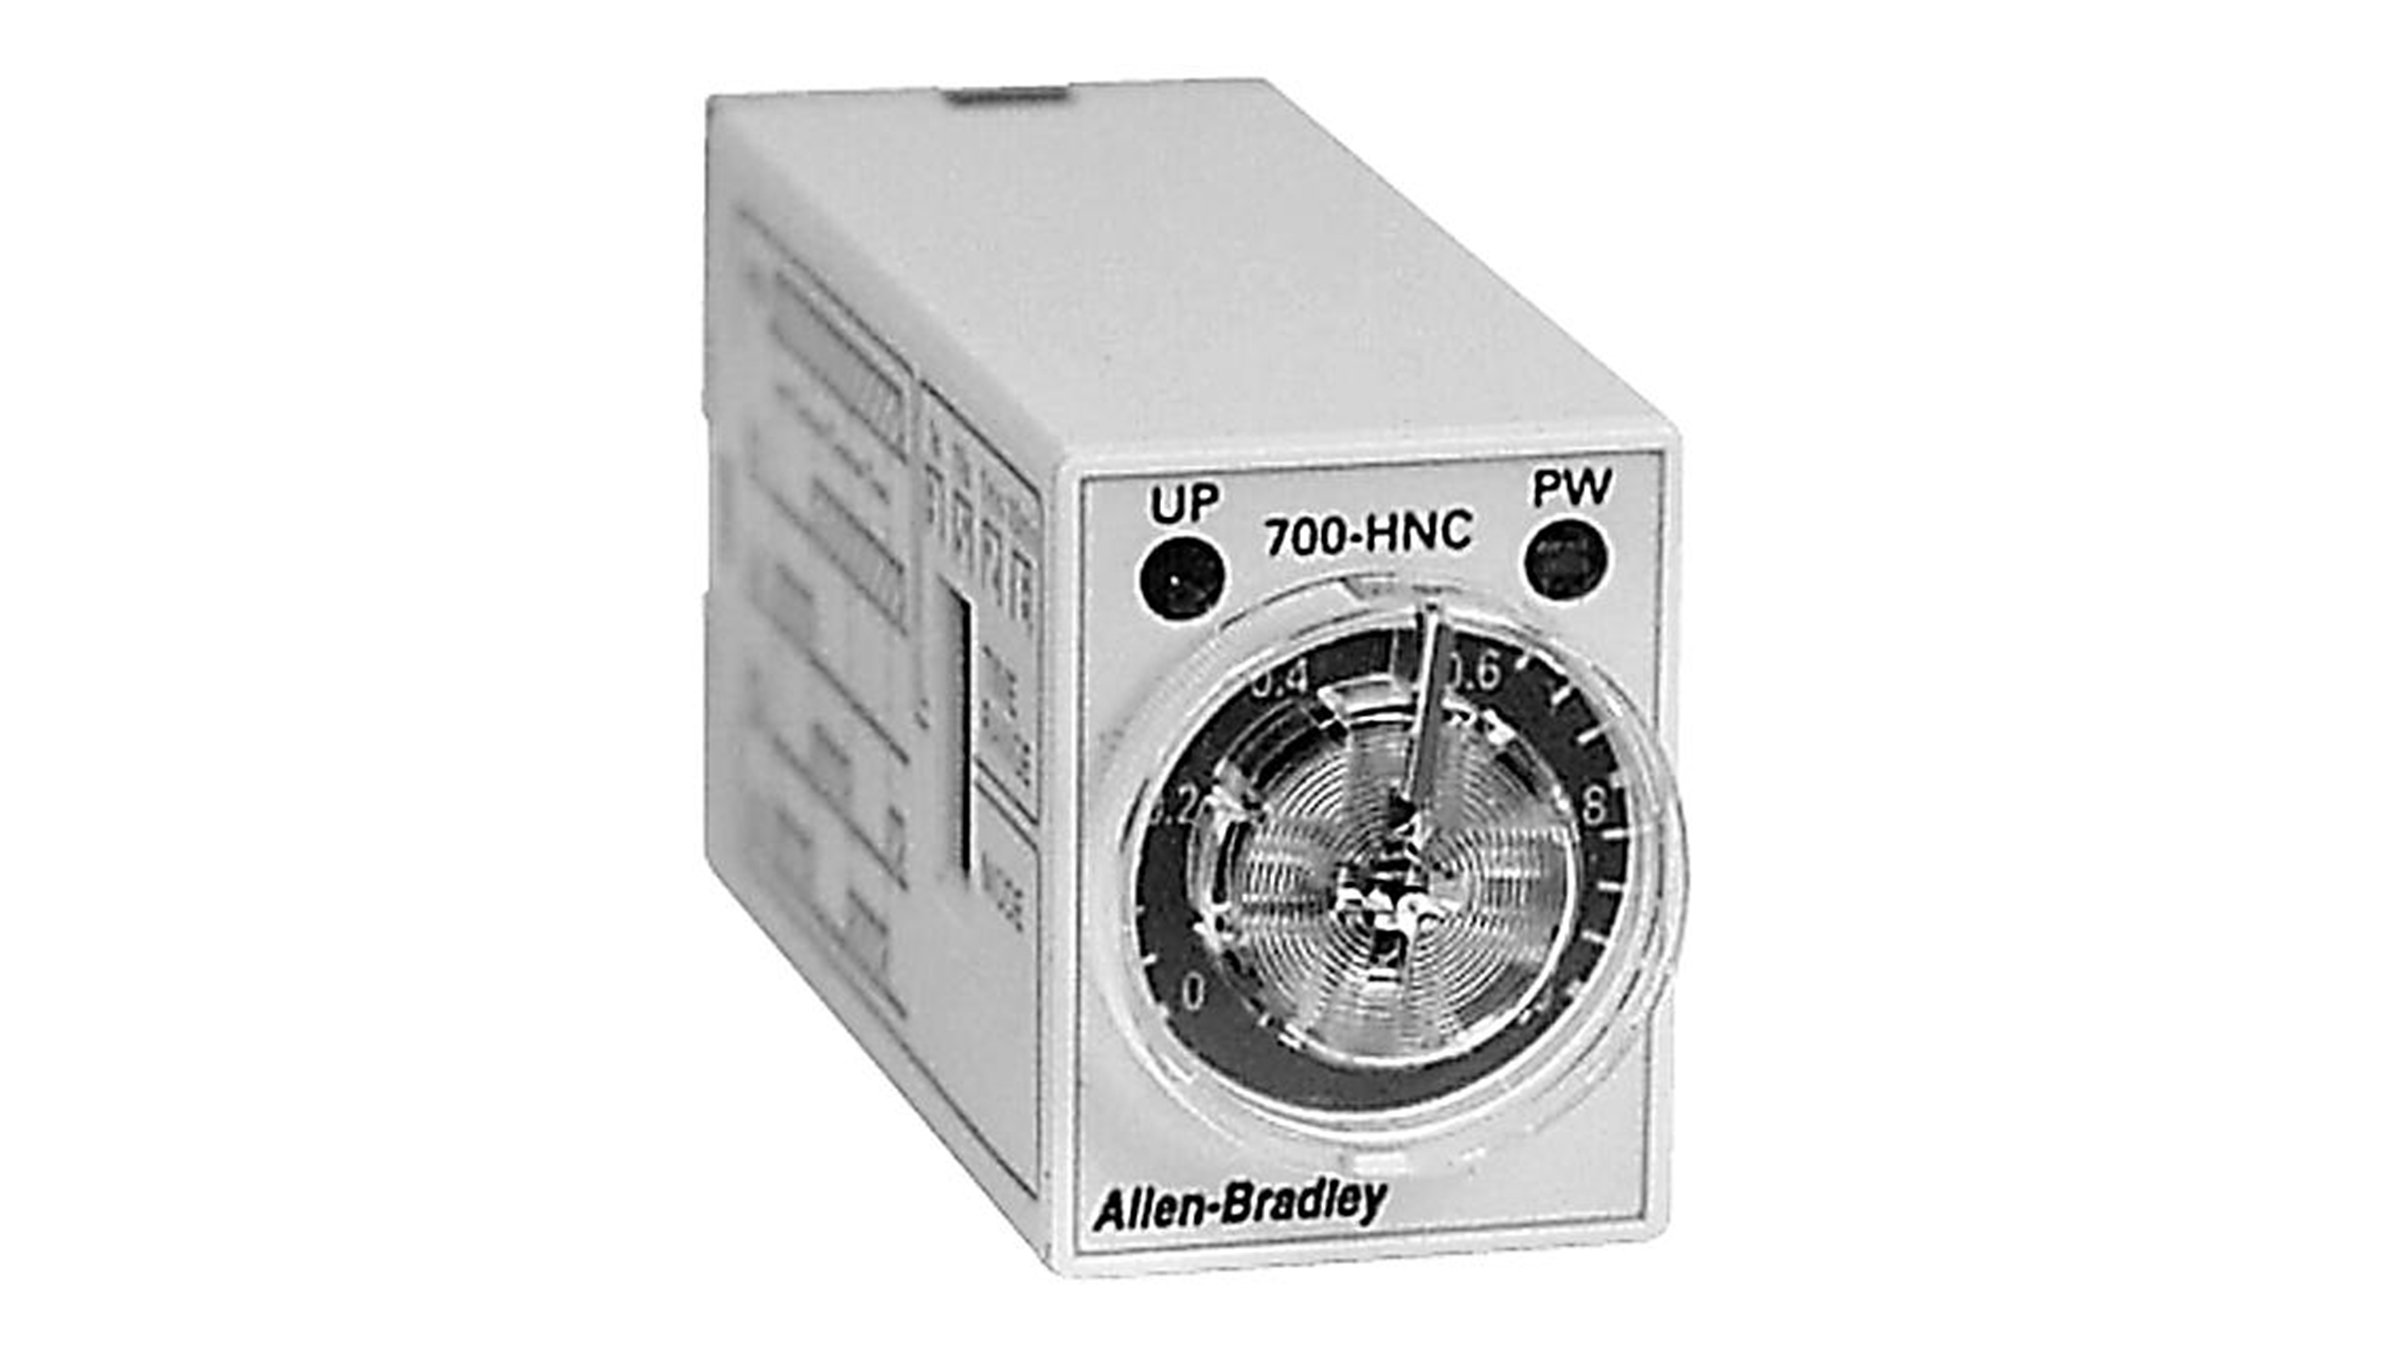 Allen-Bradley Bulletin 700-HNC Miniature Timing Relays are some of the smallest timing relays available.